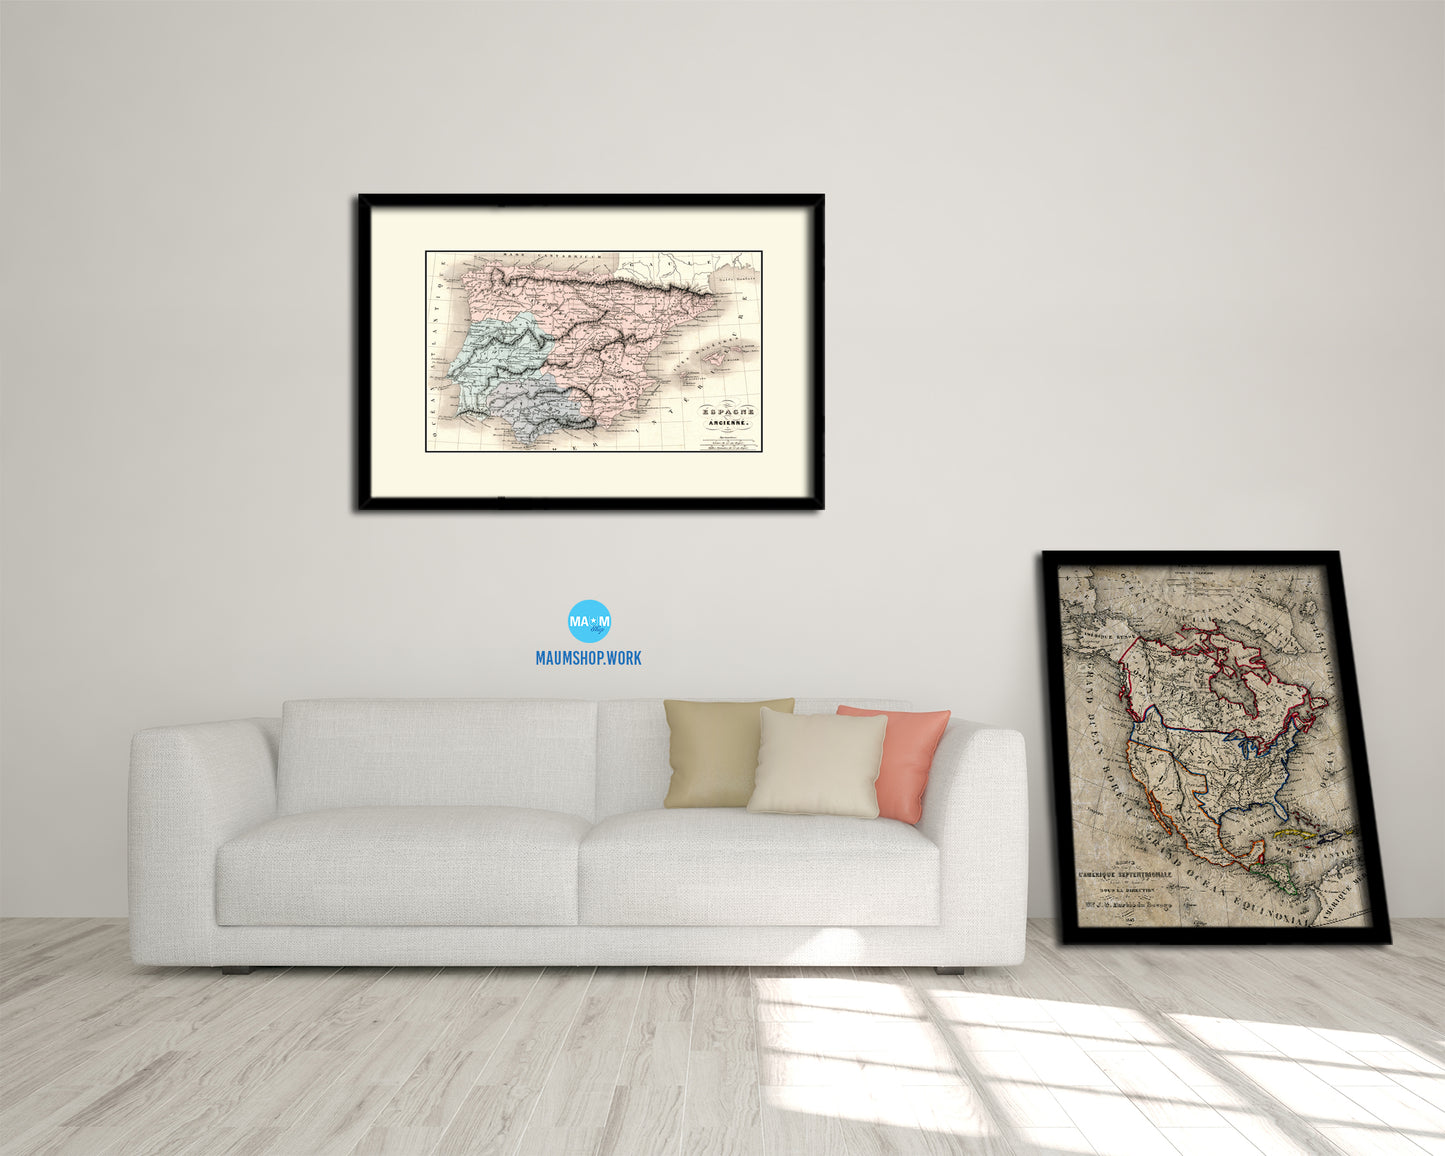 Espagne Ancienne Old Map Framed Print Art Wall Decor Gifts